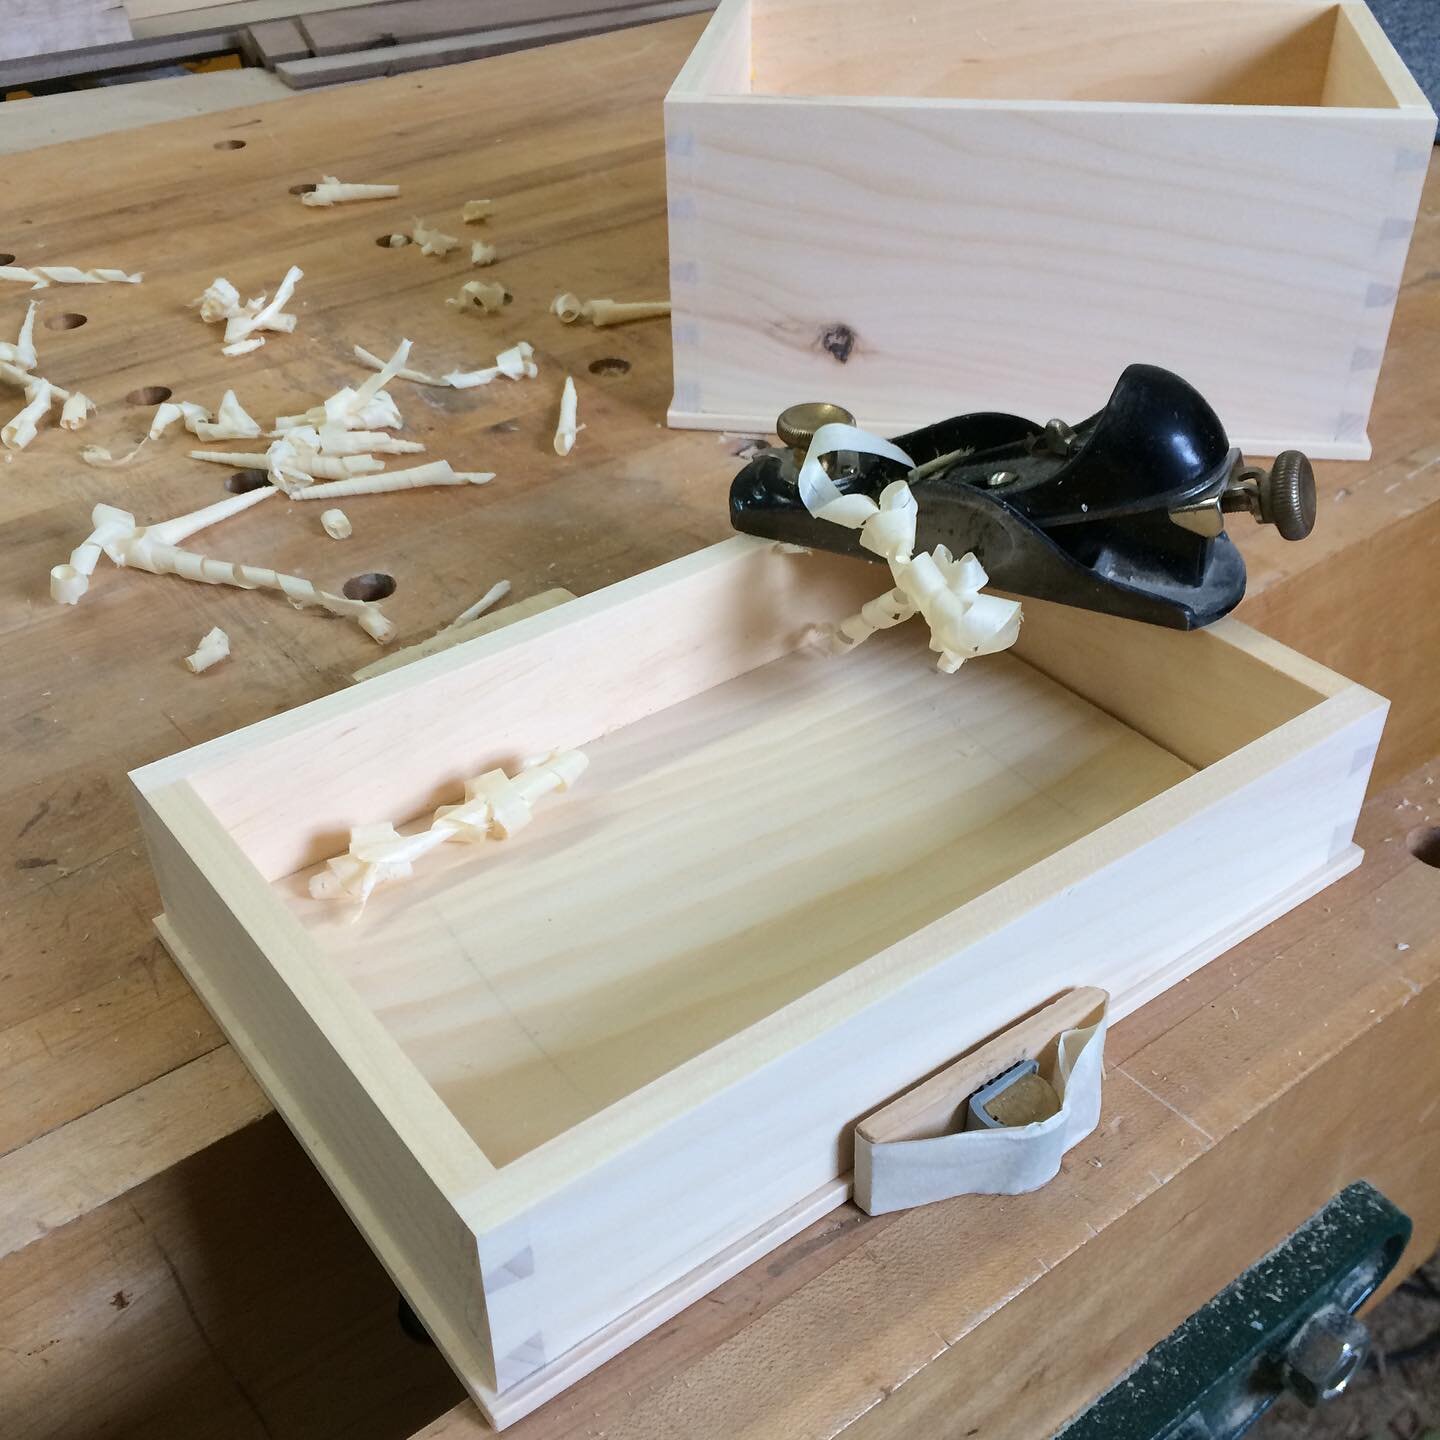 A little quiet work at the bench is a nice way to end off the week. Leveling the mating surfaces of these dovetailed boxes that were built as one closed box then cut open so the grain matches up again when they come together again.

#blockplane #dove